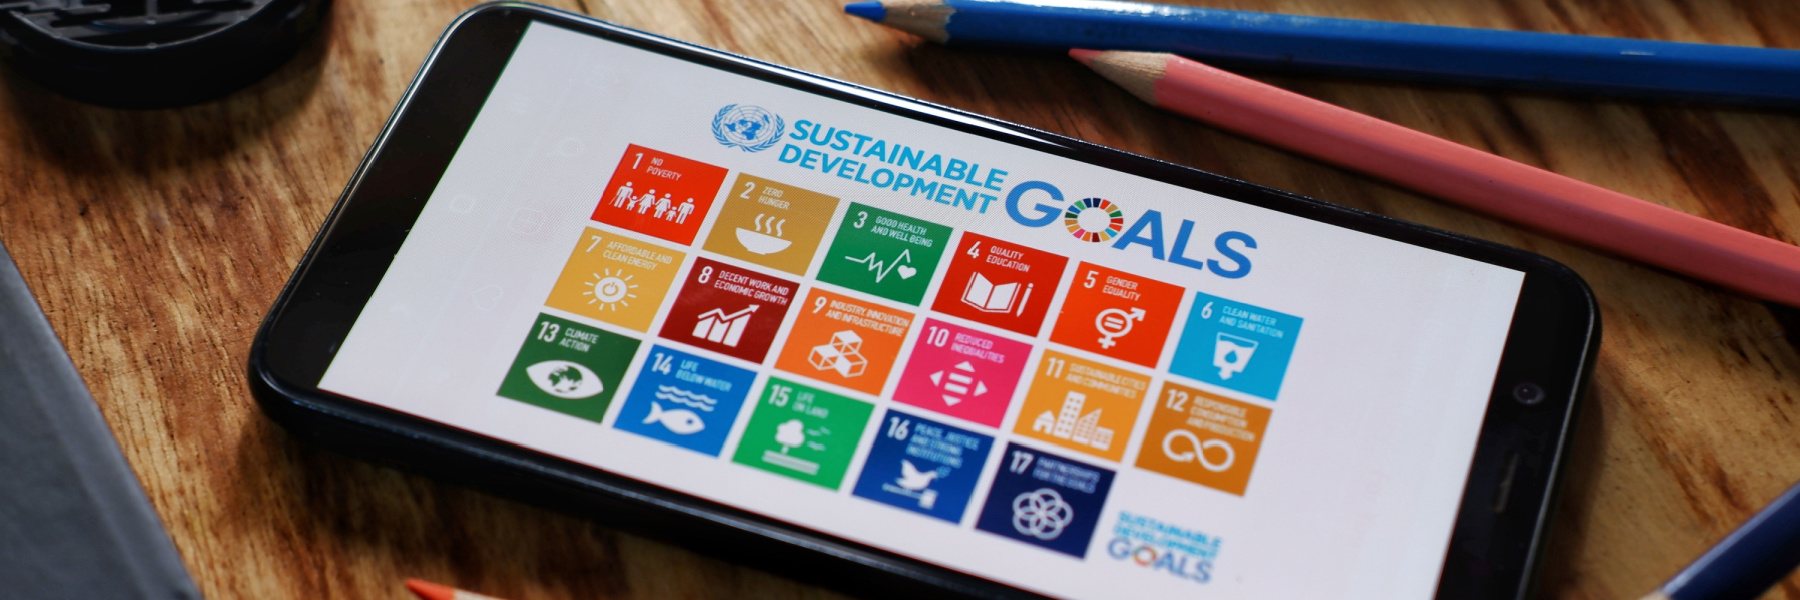 tablet united nations sustainability goals unsdgs